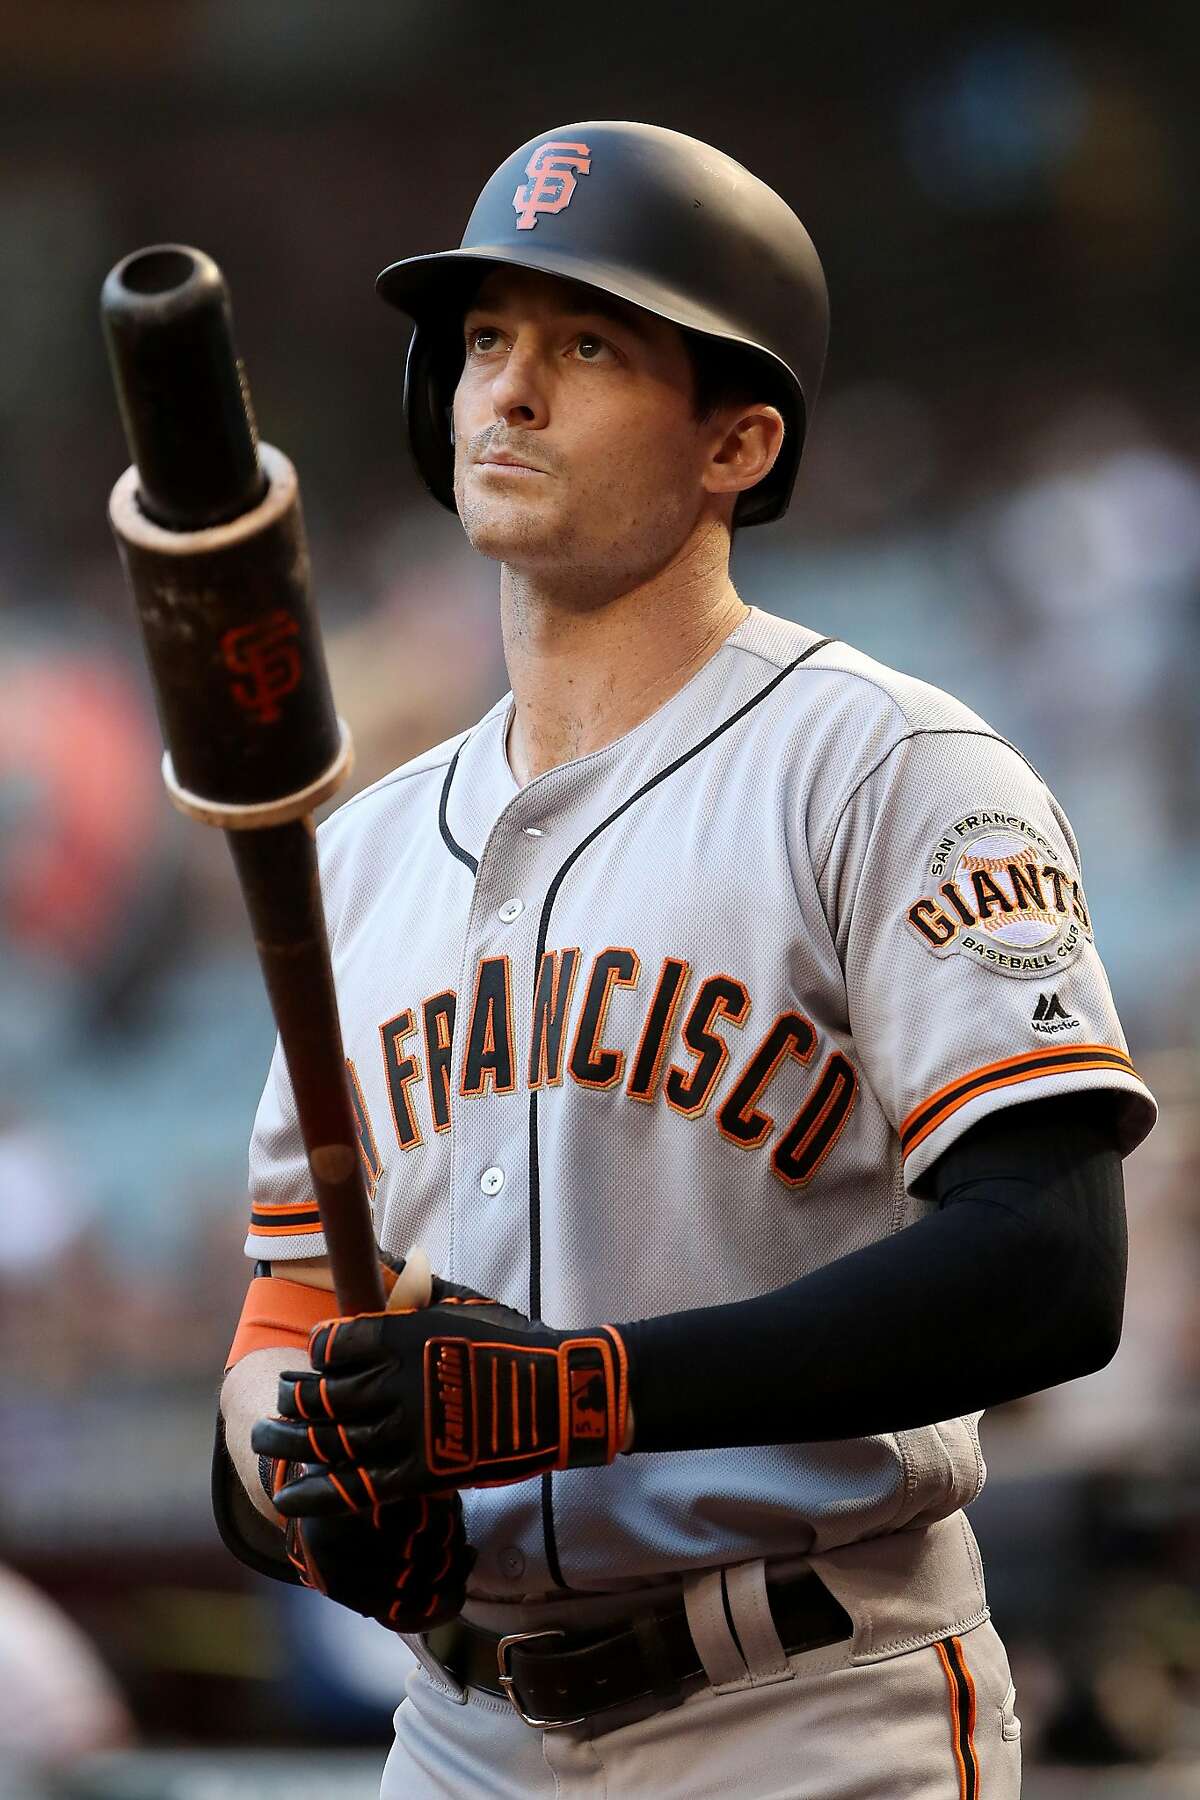 Mike Yastrzemski's heroics gives Giants fans good reason to ride with team  – NBC Sports Bay Area & California